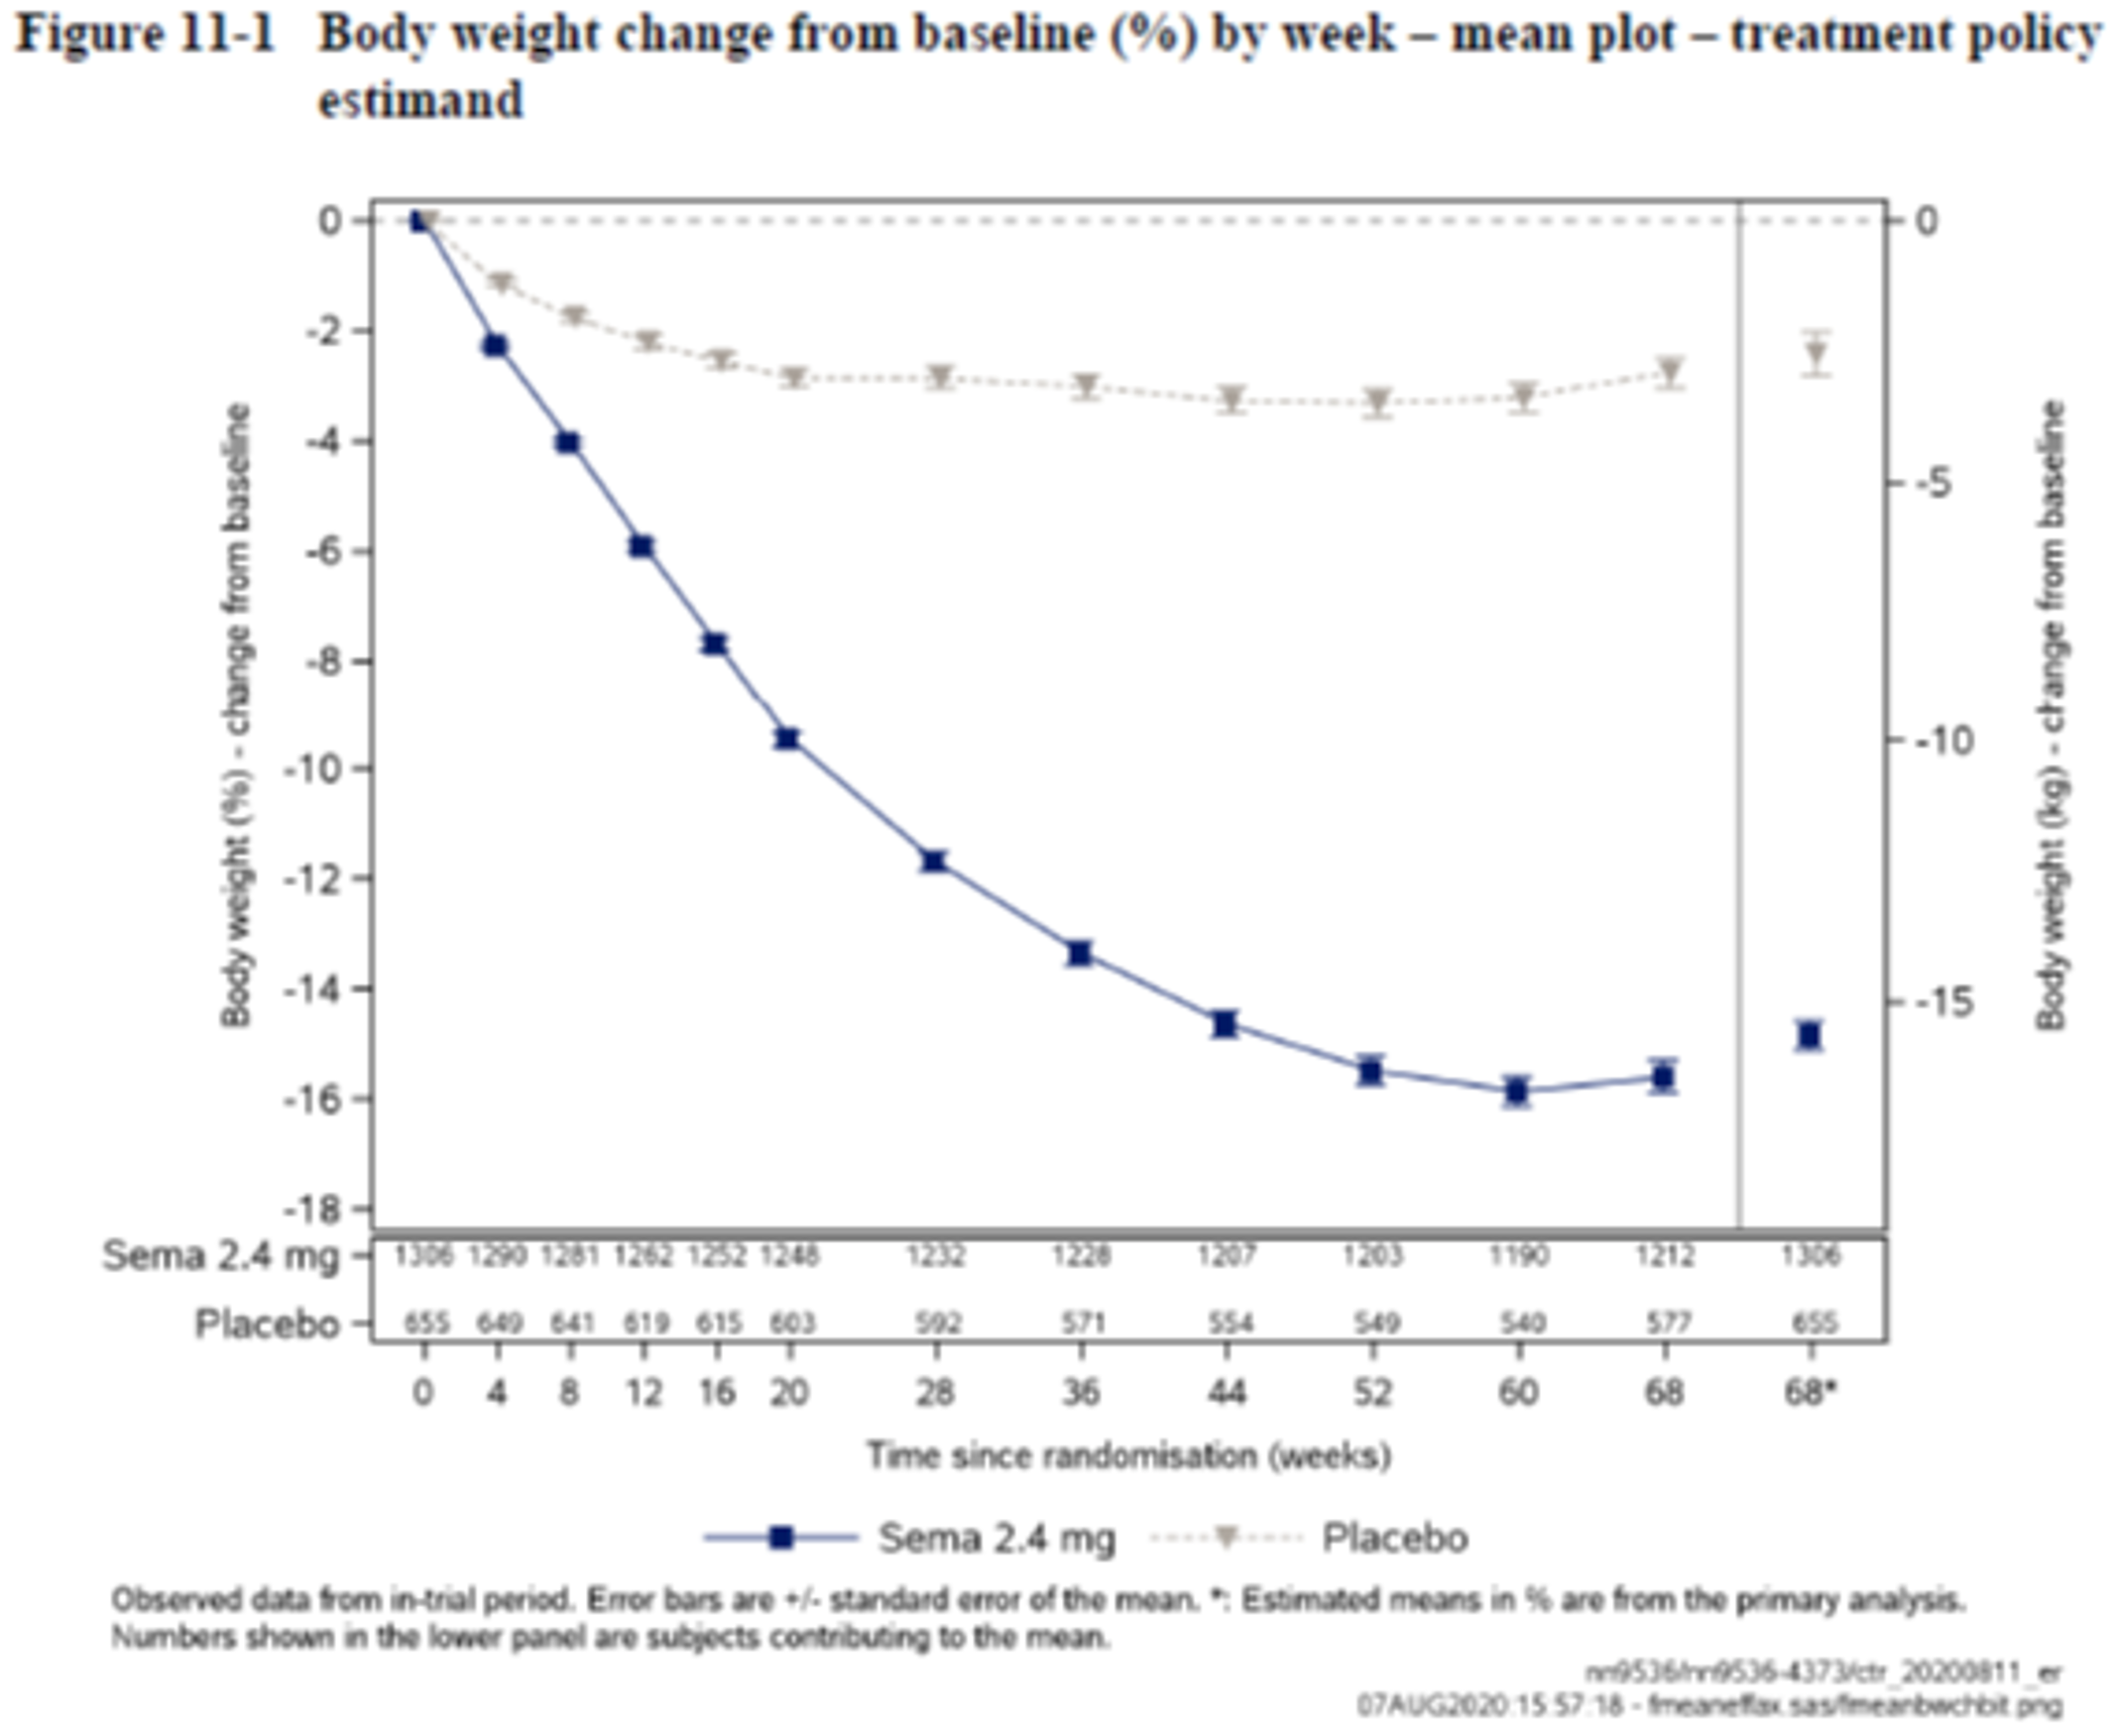 In a graph from 0 to 68 weeks, both semaglutide and placebo decrease over time, with a larger decrease in the semaglutide group, plateauing at around 60 weeks.